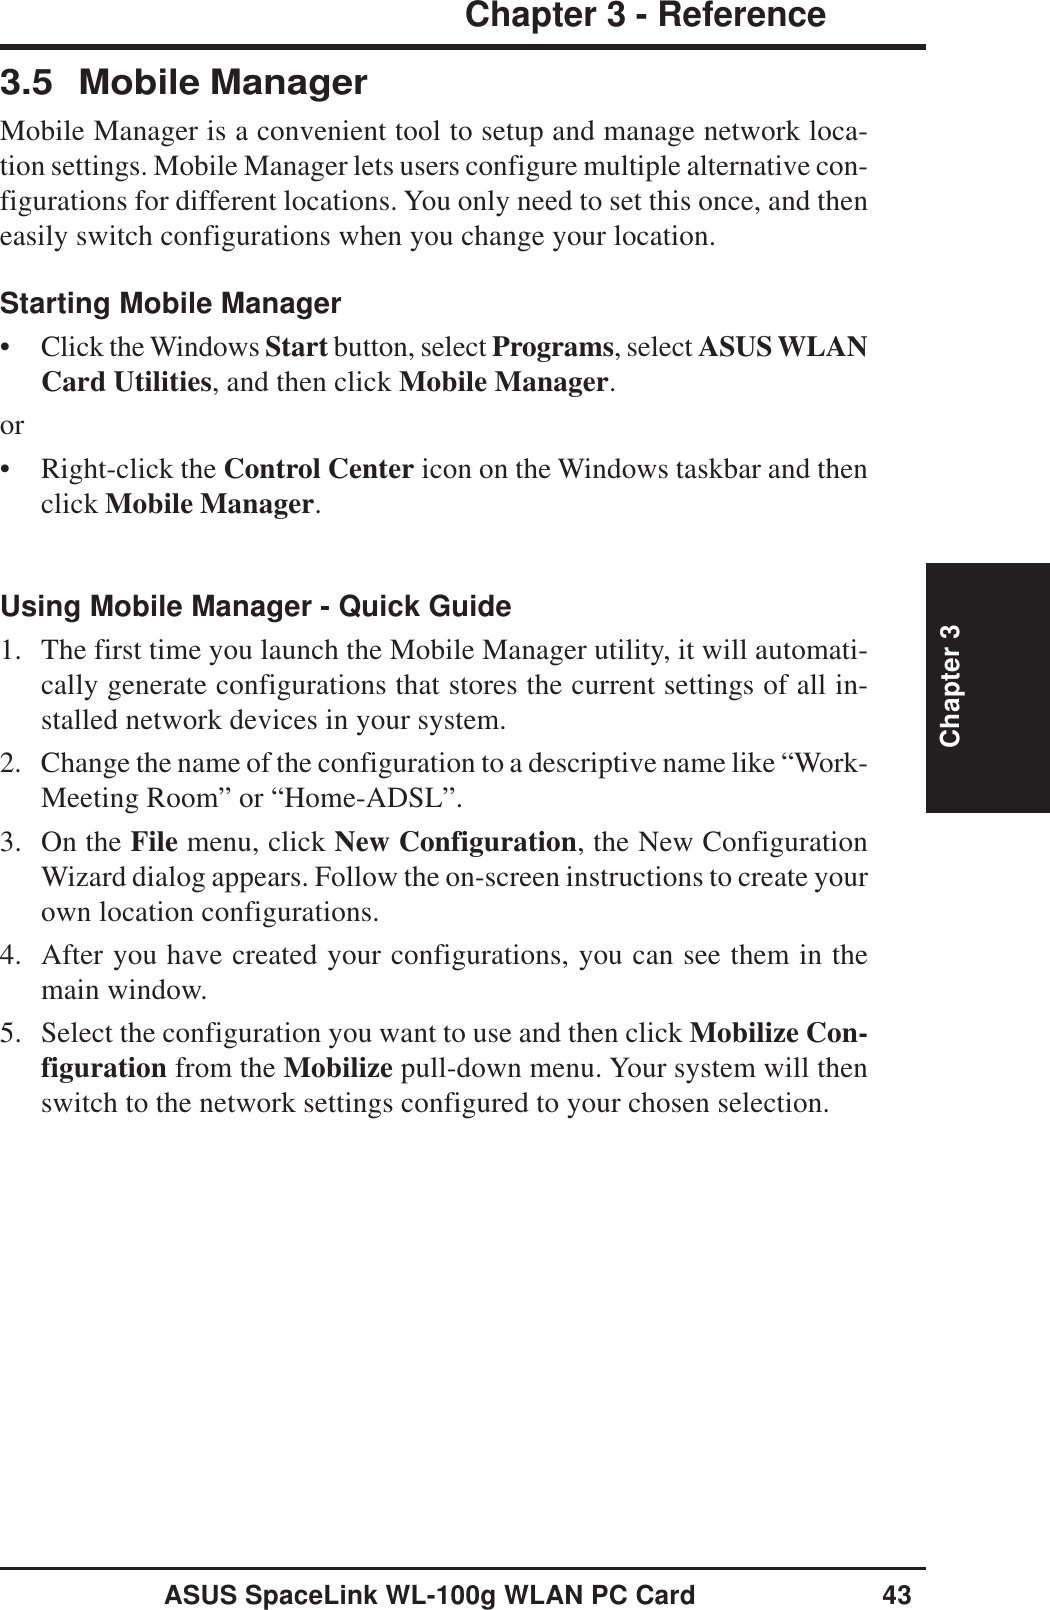 ASUS SpaceLink WL-100g WLAN PC Card 43Chapter 3 - ReferenceChapter 33.5 Mobile ManagerMobile Manager is a convenient tool to setup and manage network loca-tion settings. Mobile Manager lets users configure multiple alternative con-figurations for different locations. You only need to set this once, and theneasily switch configurations when you change your location.Starting Mobile Manager• Click the Windows Start button, select Programs, select ASUS WLANCard Utilities, and then click Mobile Manager.or• Right-click the Control Center icon on the Windows taskbar and thenclick Mobile Manager.Using Mobile Manager - Quick Guide1. The first time you launch the Mobile Manager utility, it will automati-cally generate configurations that stores the current settings of all in-stalled network devices in your system.2. Change the name of the configuration to a descriptive name like “Work-Meeting Room” or “Home-ADSL”.3. On the File menu, click New Configuration, the New ConfigurationWizard dialog appears. Follow the on-screen instructions to create yourown location configurations.4. After you have created your configurations, you can see them in themain window.5. Select the configuration you want to use and then click Mobilize Con-figuration from the Mobilize pull-down menu. Your system will thenswitch to the network settings configured to your chosen selection.